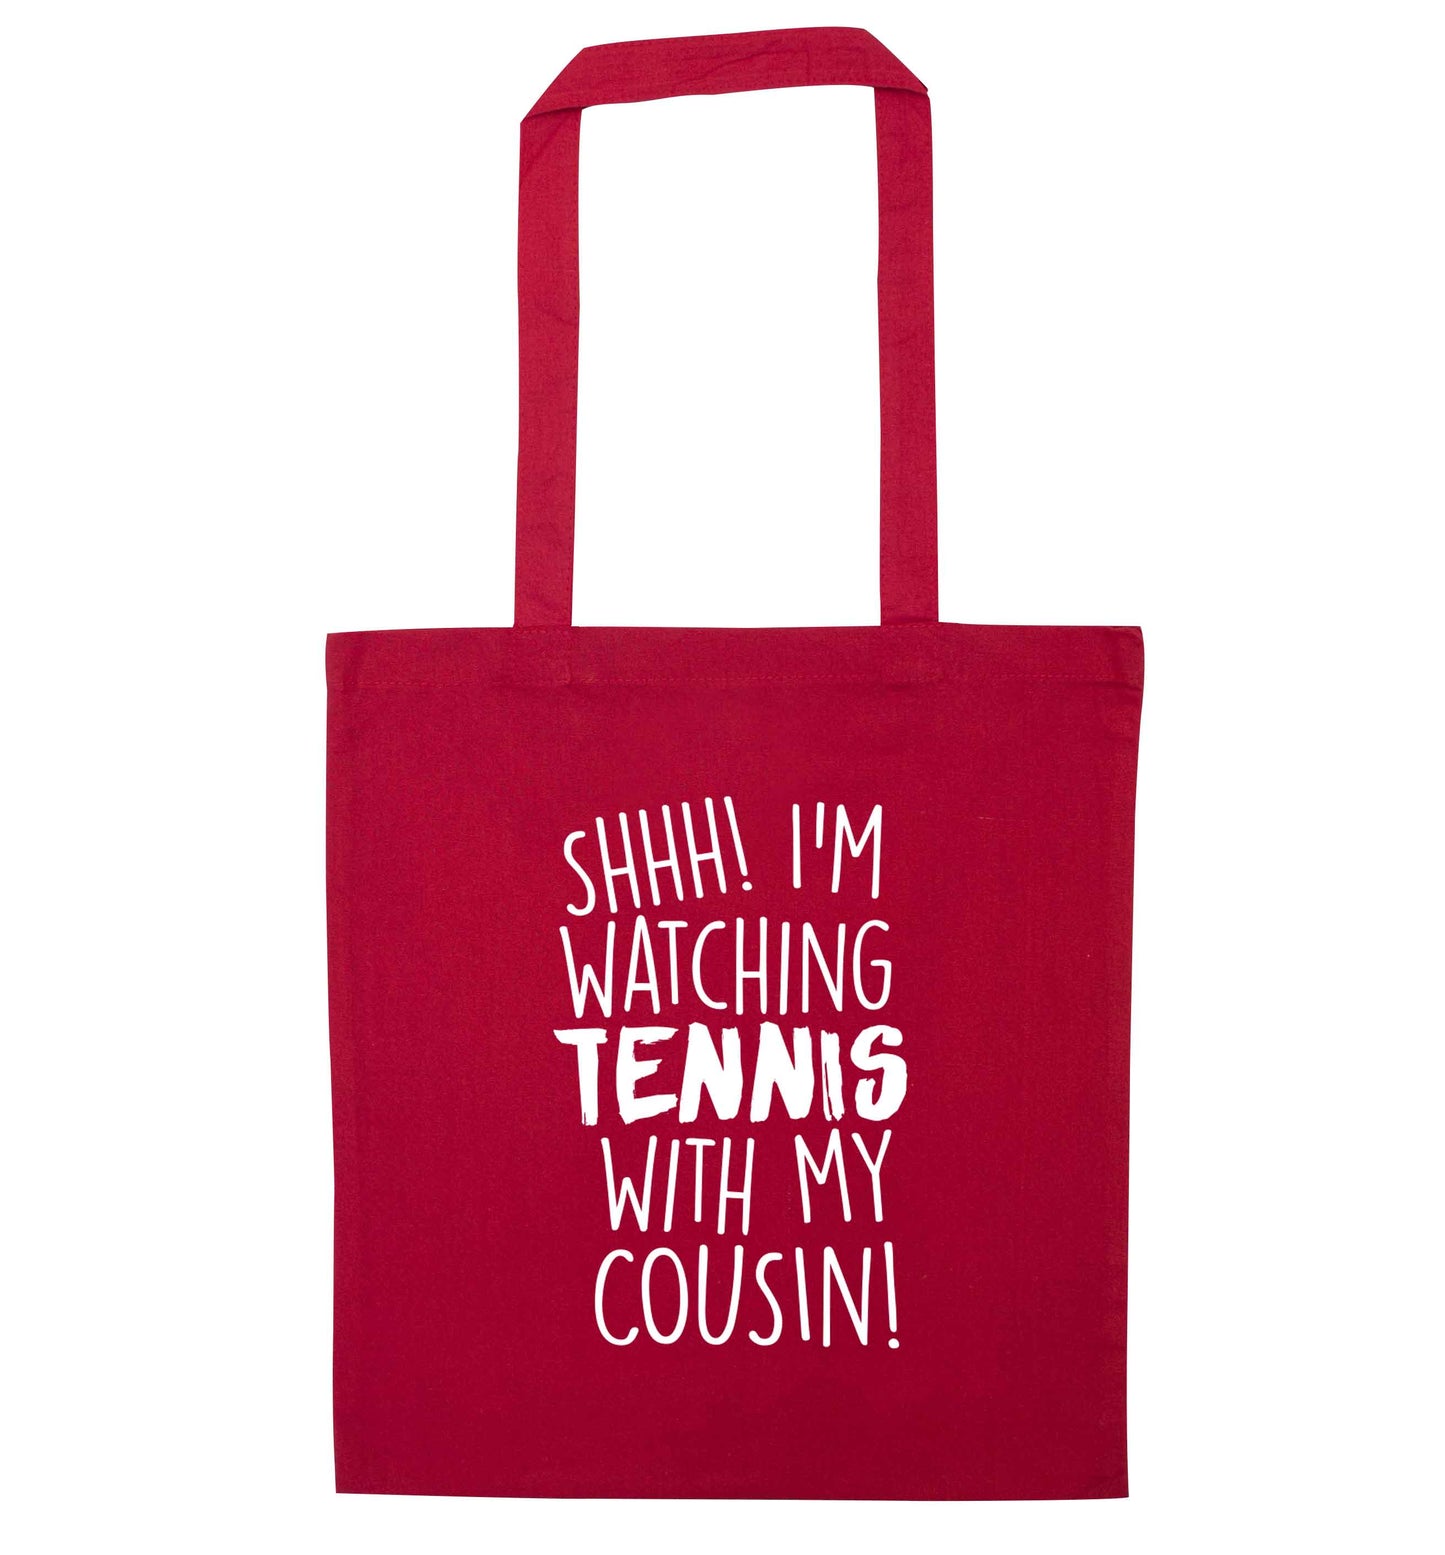 Shh! I'm watching tennis with my cousin! red tote bag